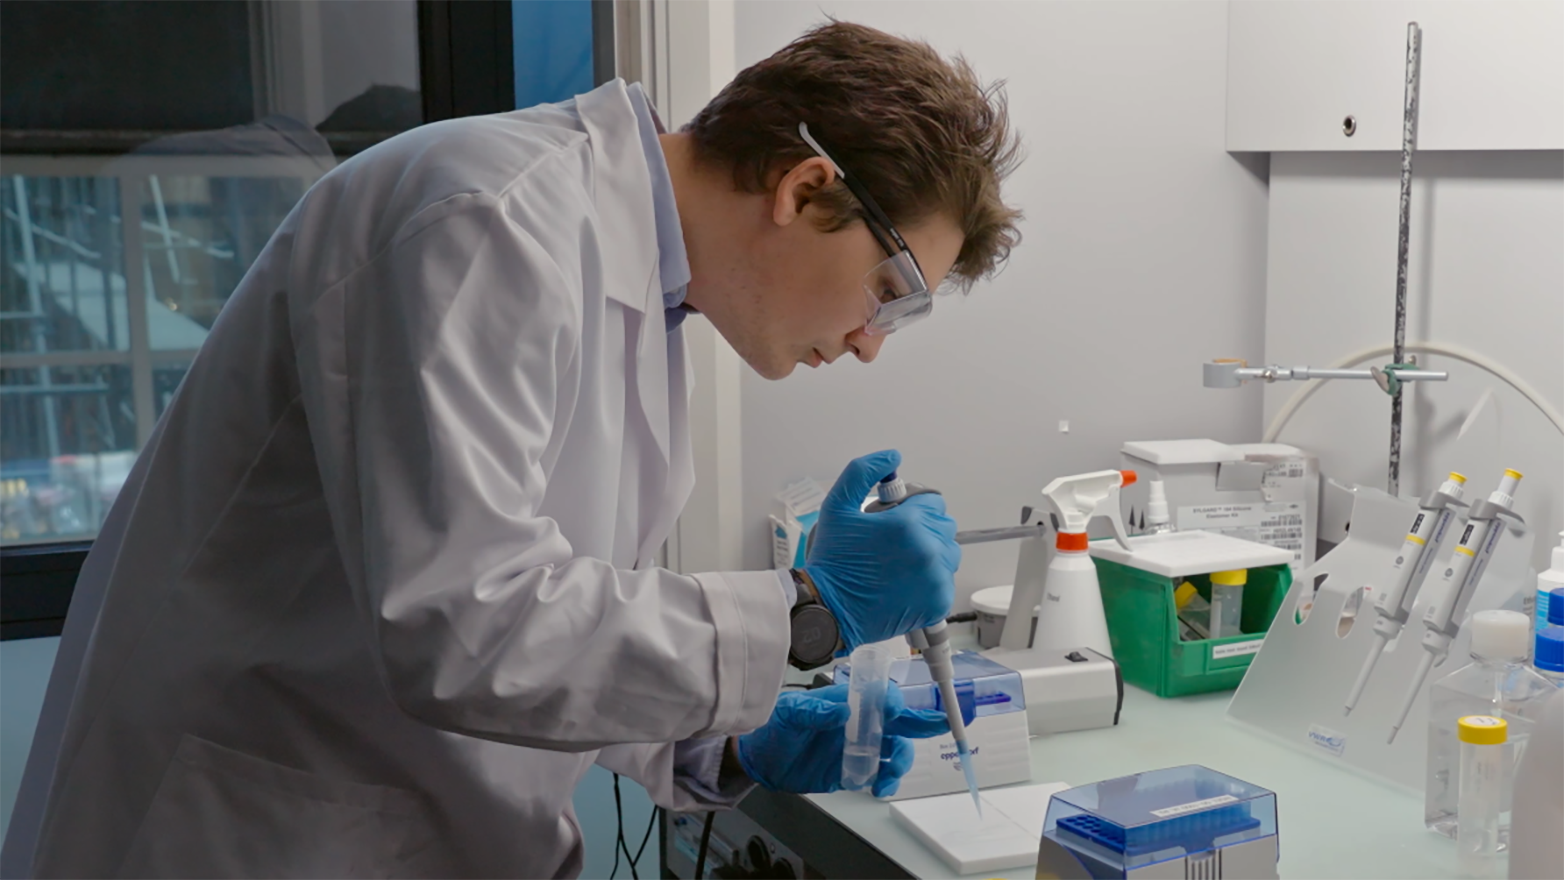 Alexandre Anthis at work in the laboratory.